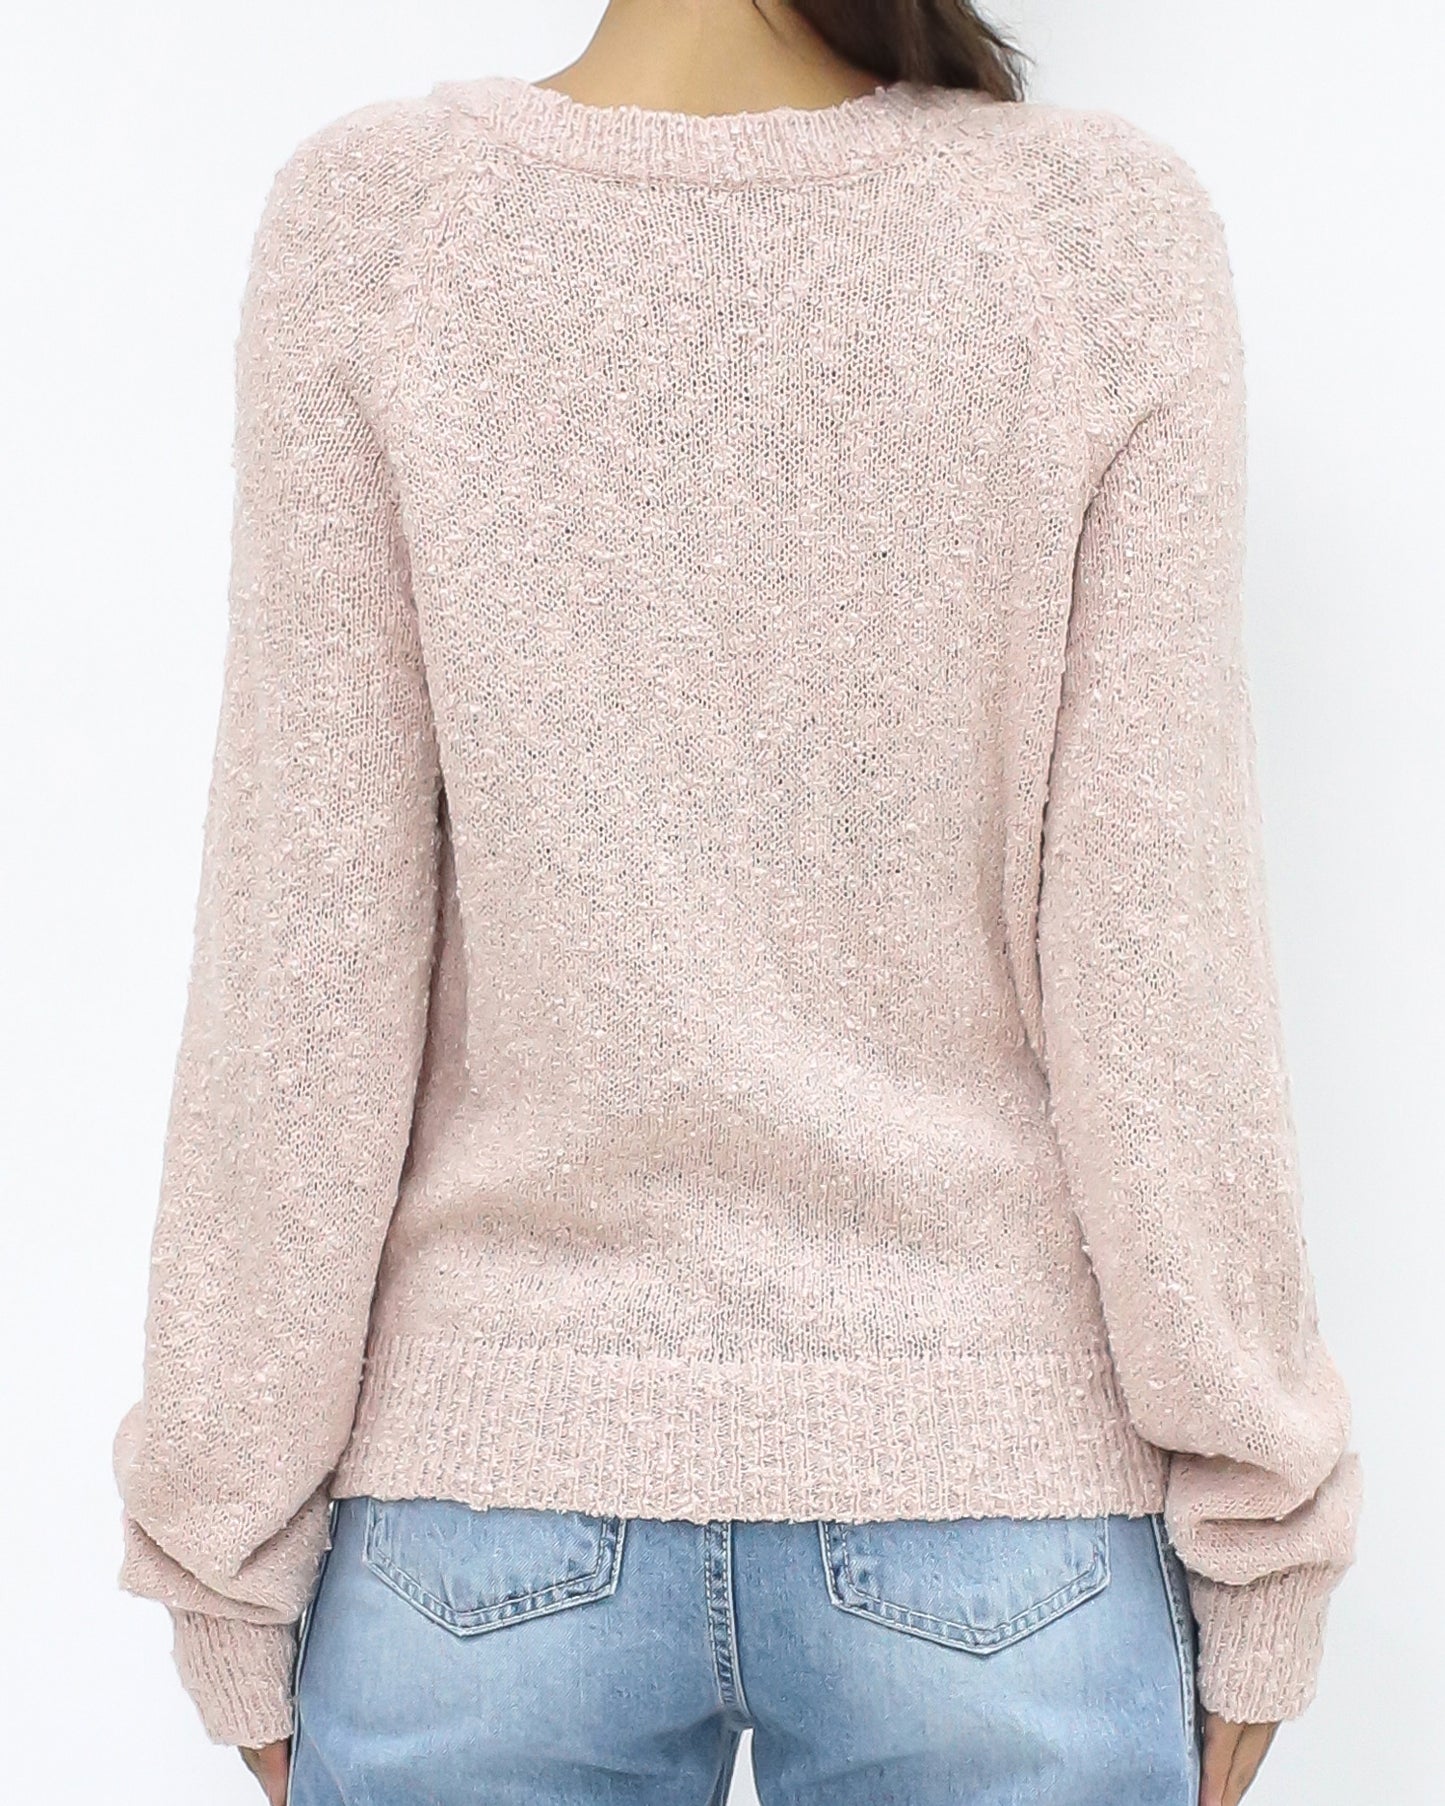 marl pink knitted top *pre-order*